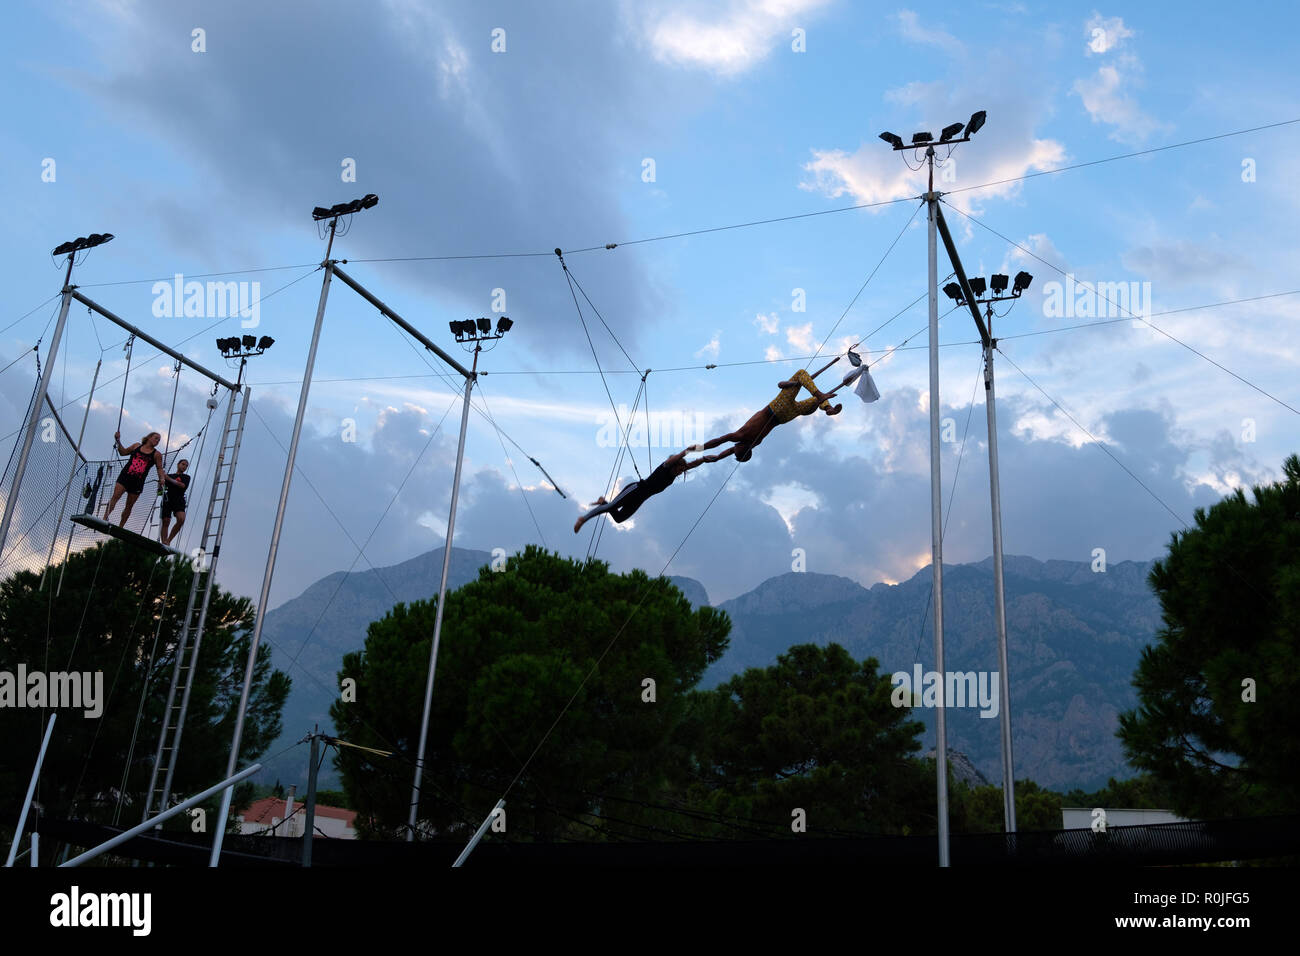 Flying trapeze school with circus activities at the Club Med Palmiye luxury all inclusive resort, Kemer, Antalya, Turkey Stock Photo